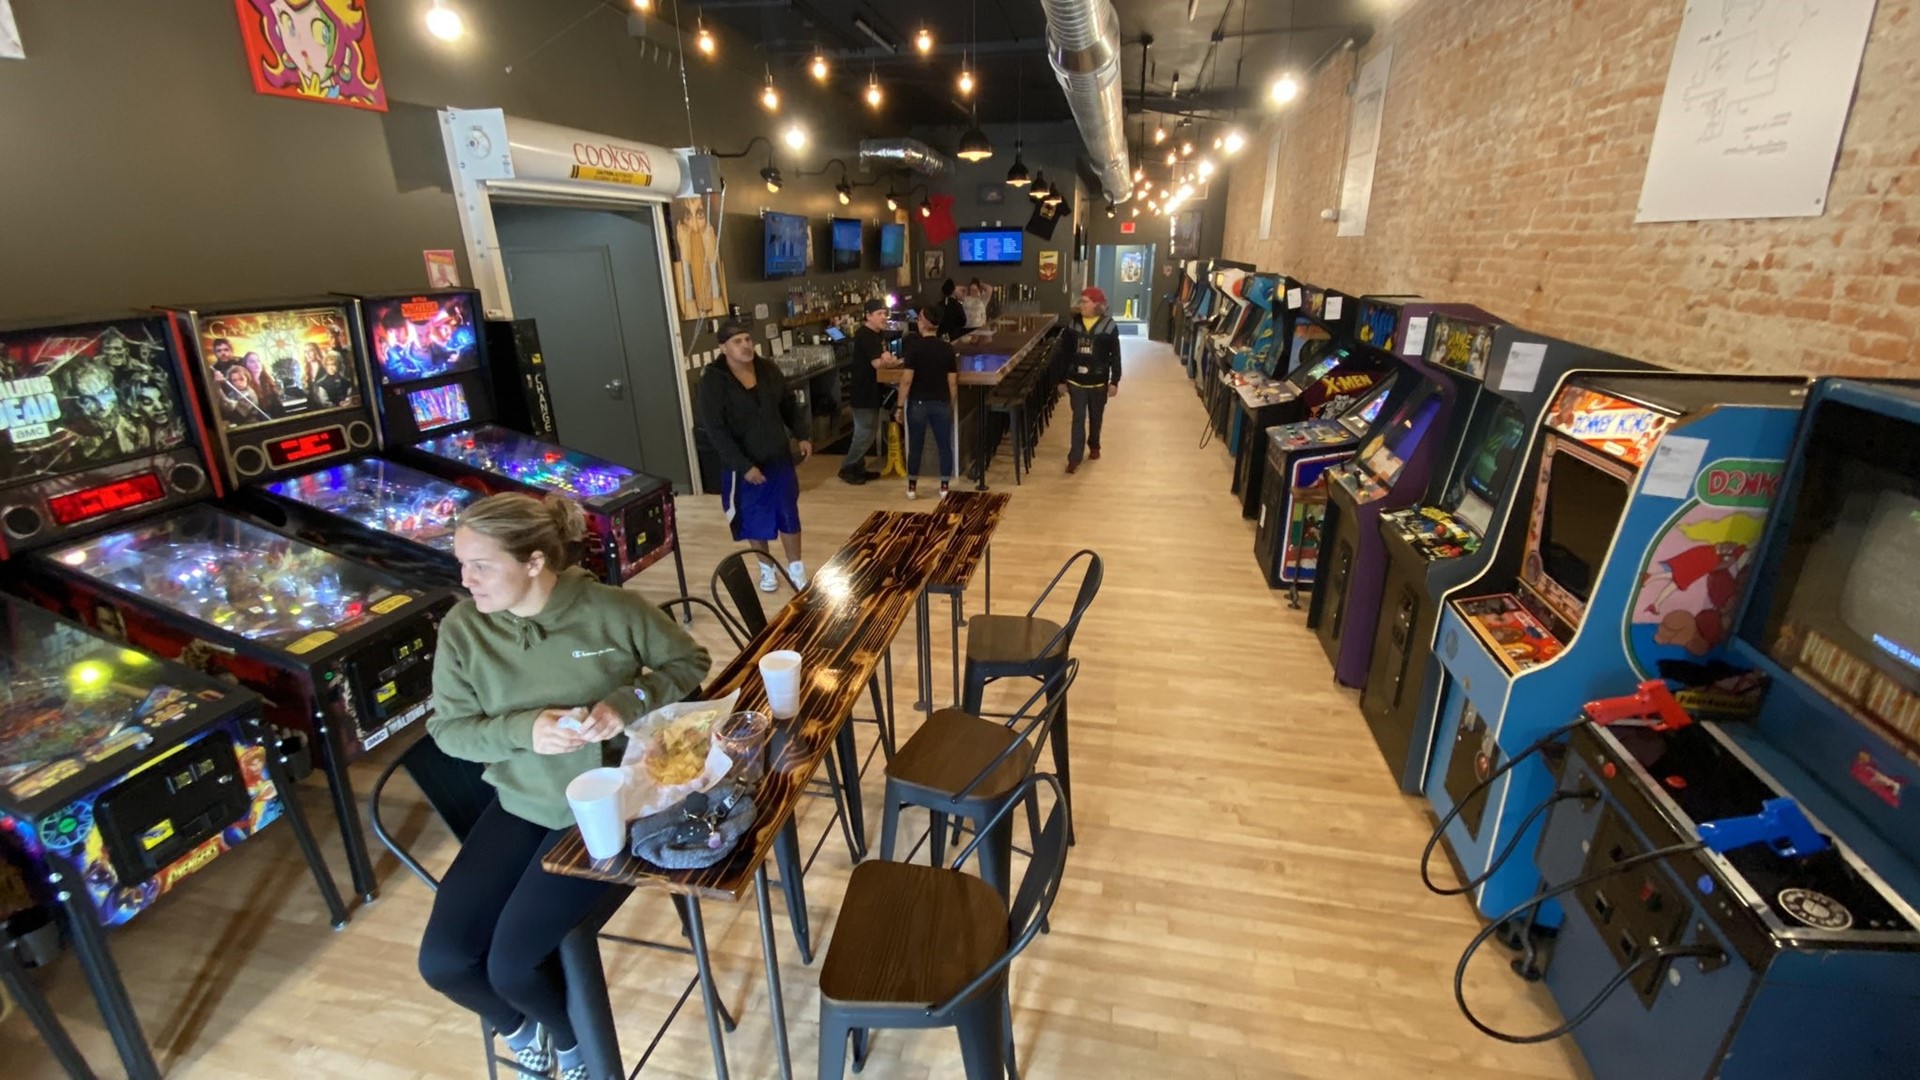 The Flag City staple for more than 30 years has doubled in size, now offering a full bar and dozens of classic arcade cabinets.